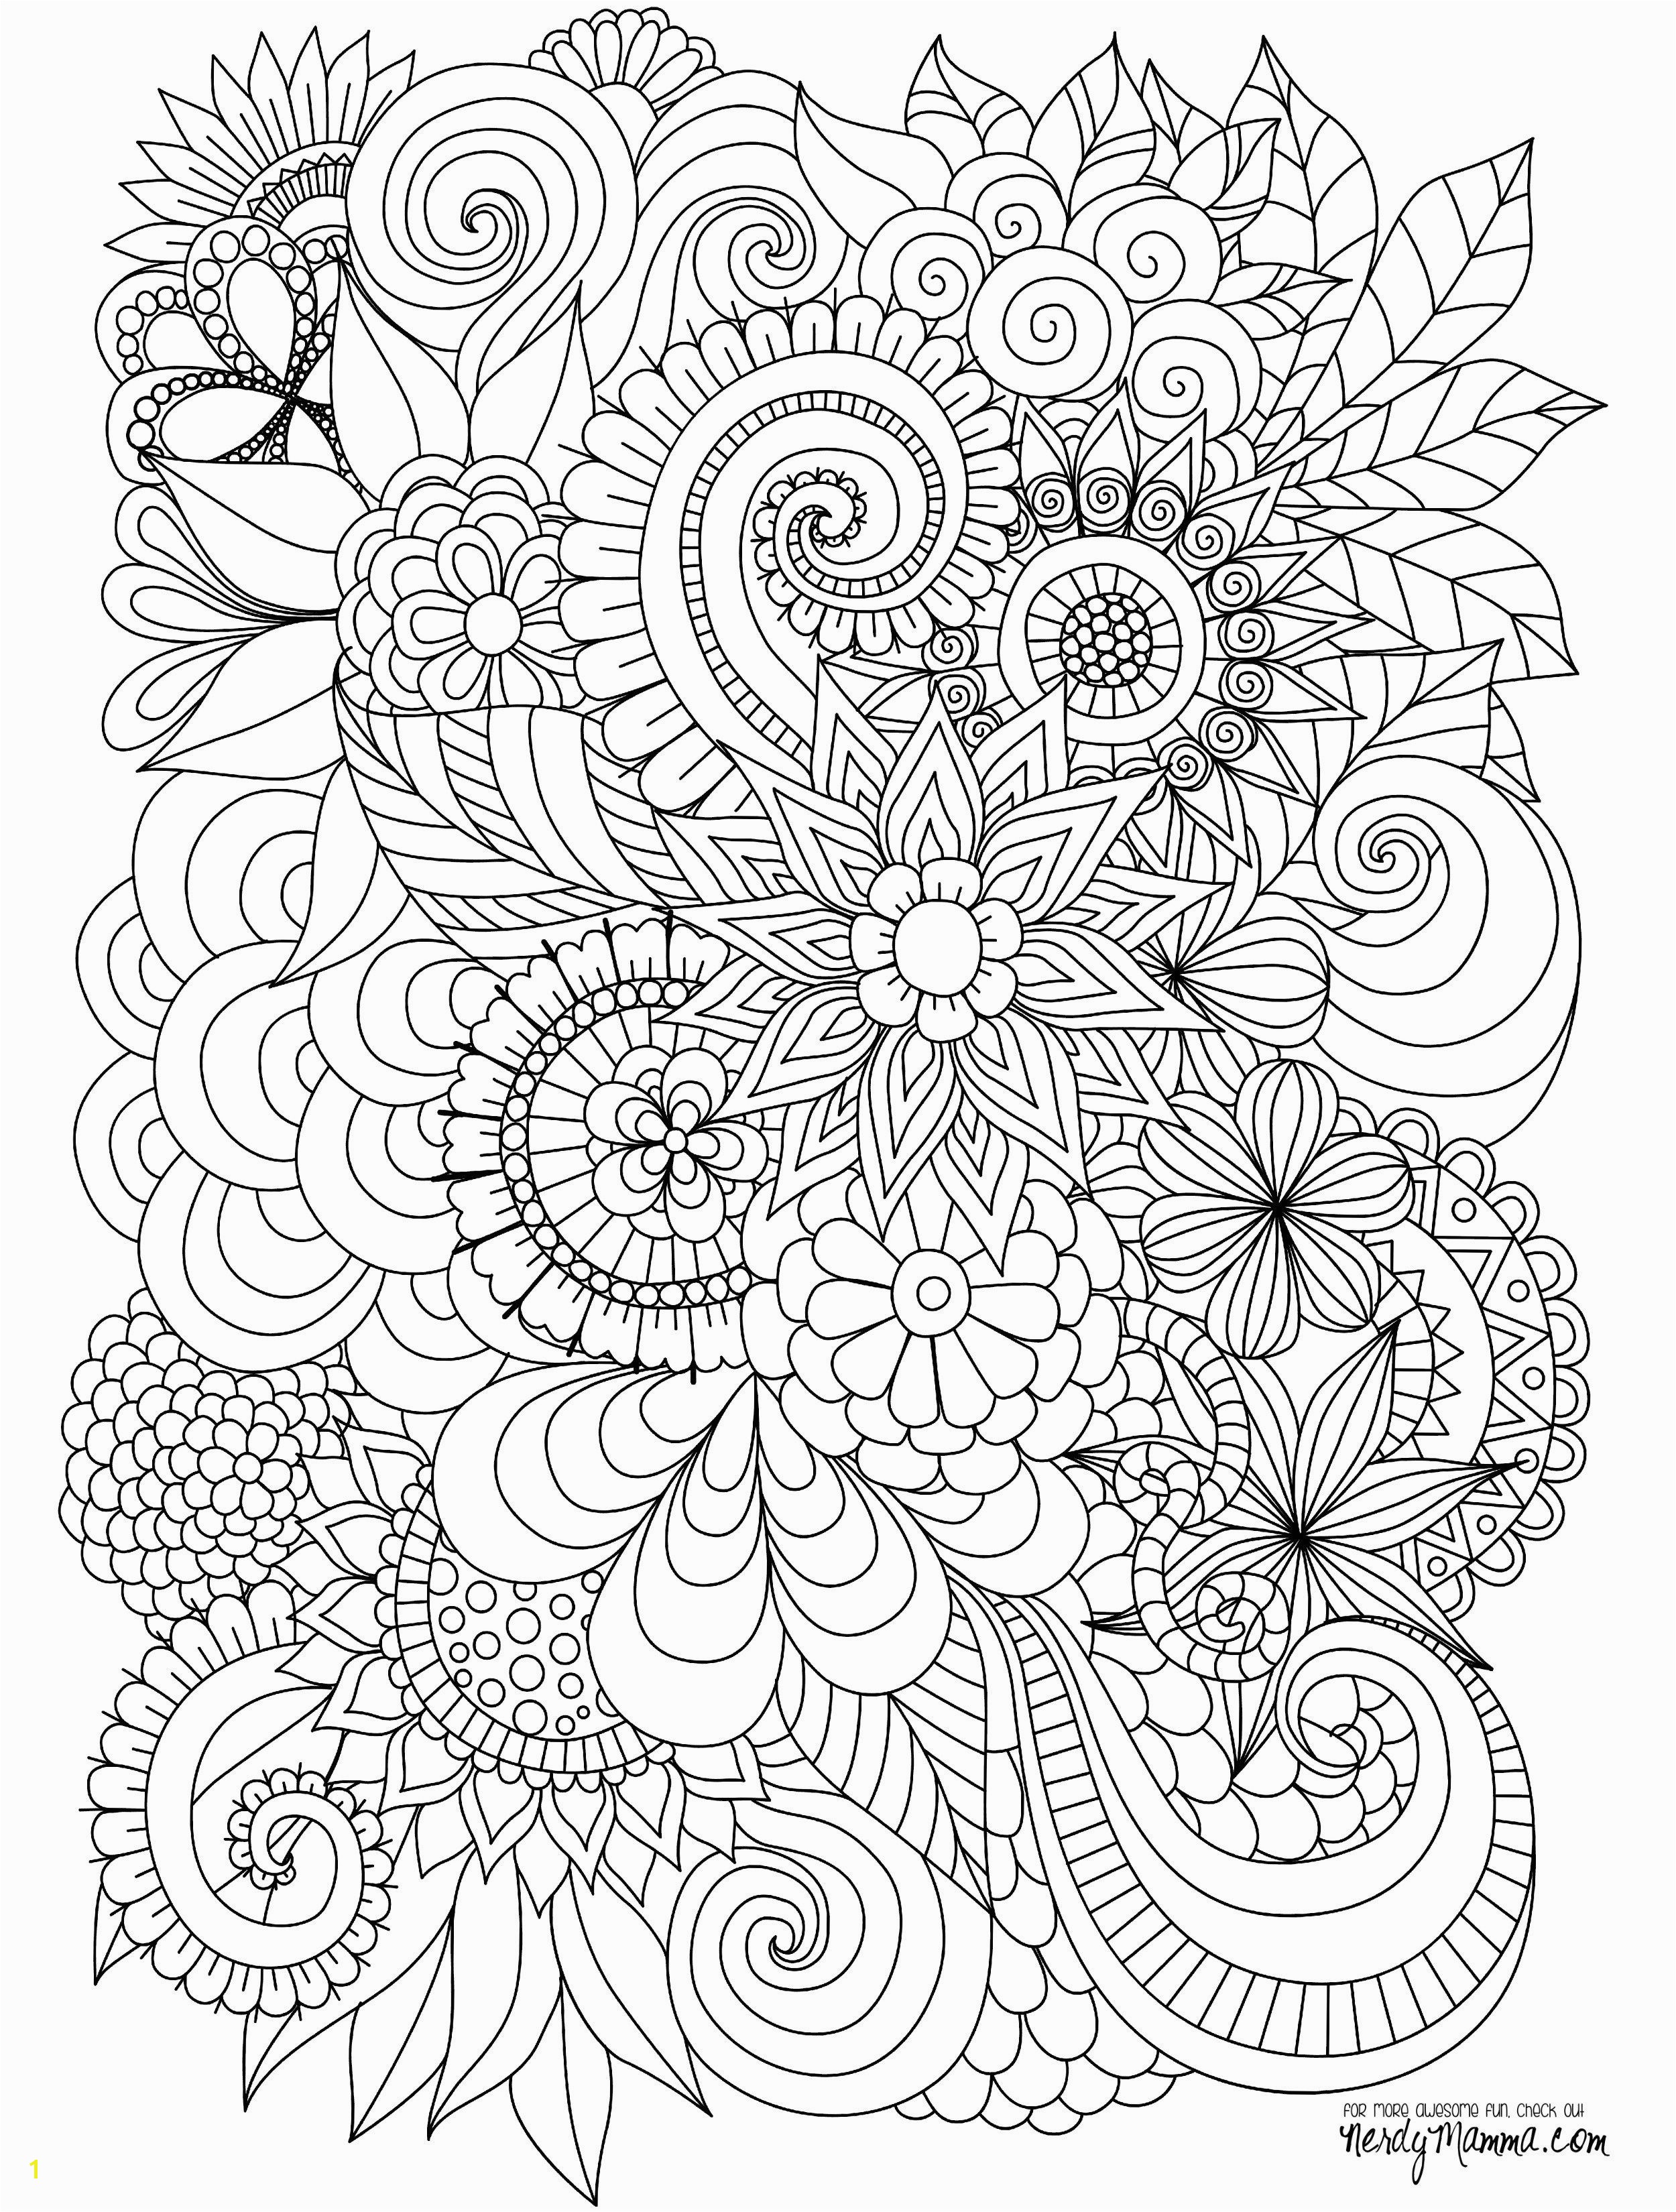 Flower Coloring Pages for Adults to Print Flowers Abstract Coloring Pages Colouring Adult Detailed Advanced